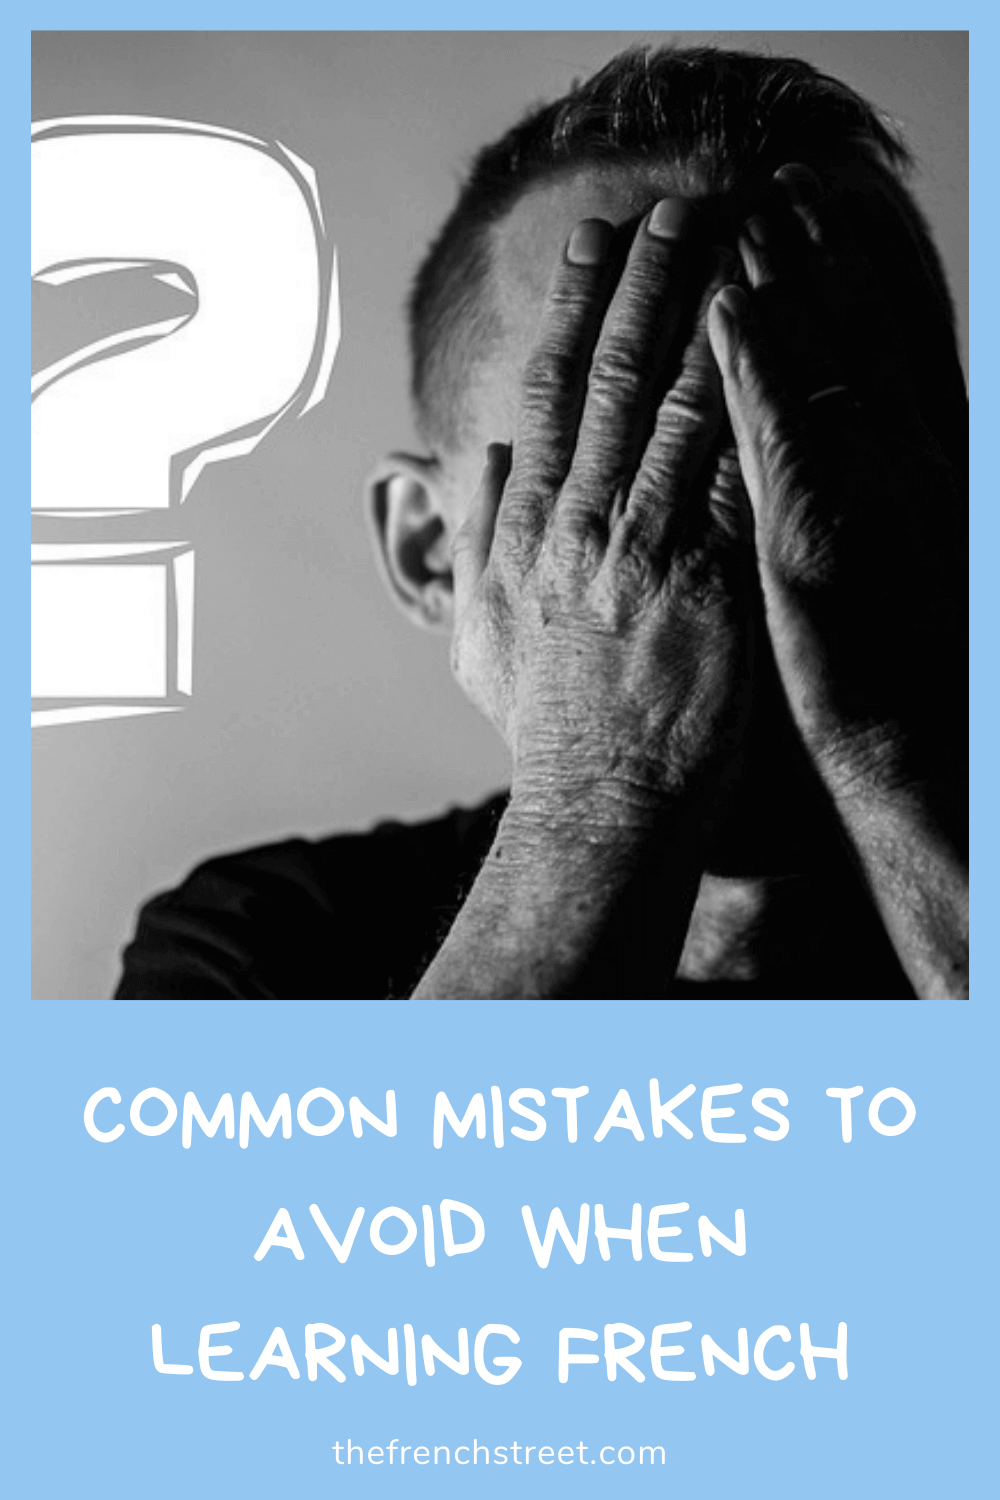 Common Mistakes to Avoid when Learning French